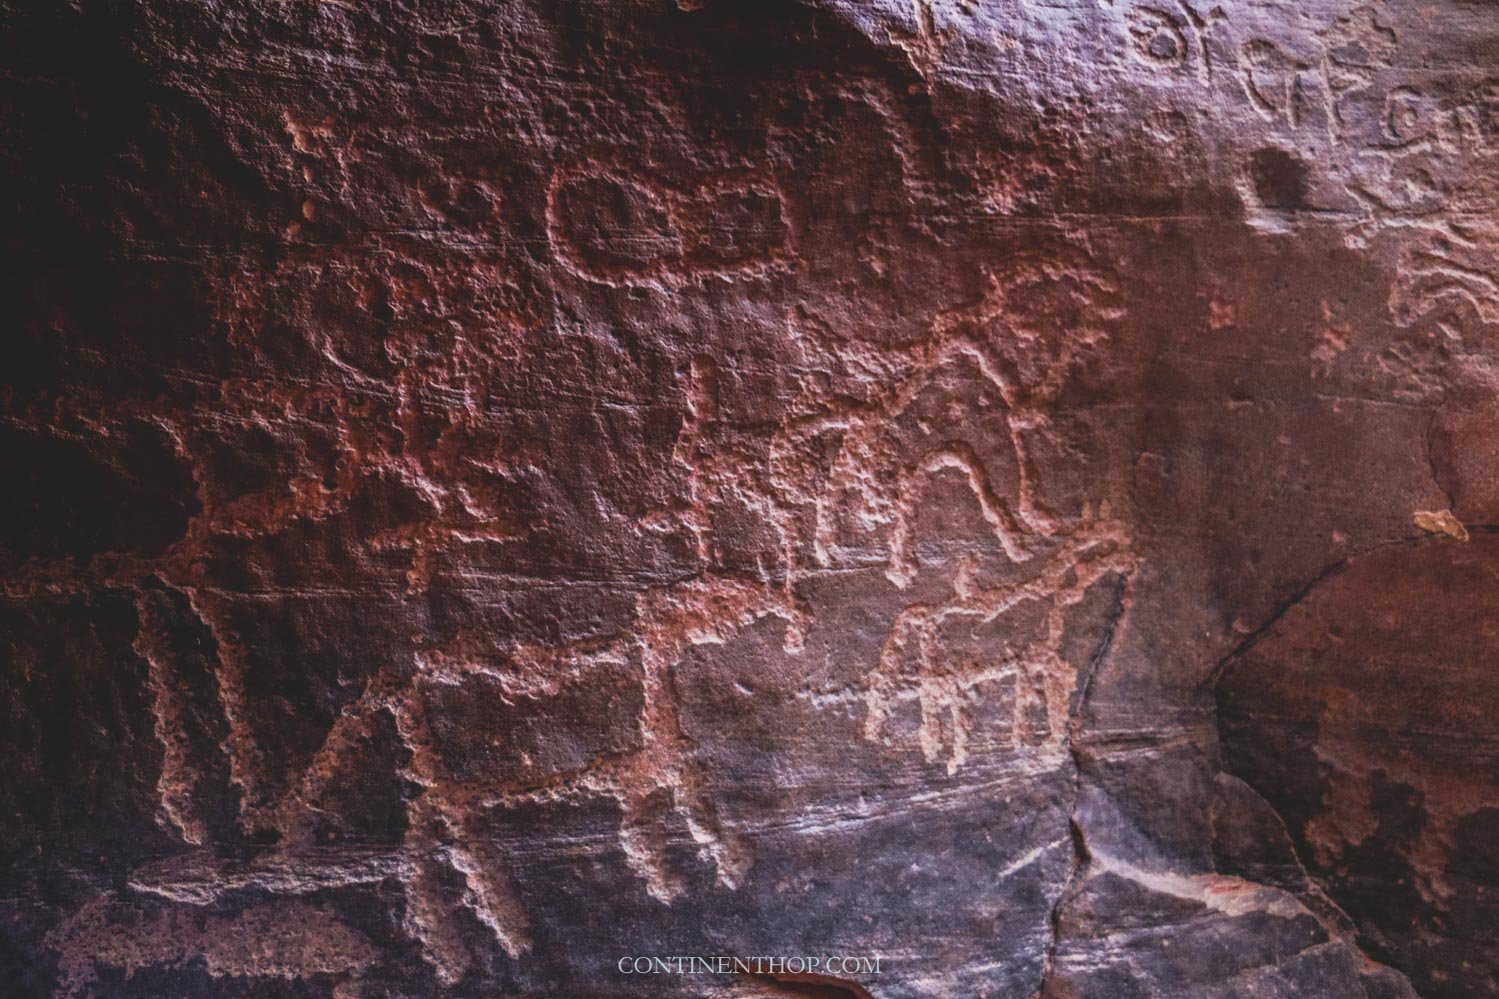 Things to do in Wadi Rum - see the ancient inscriptions